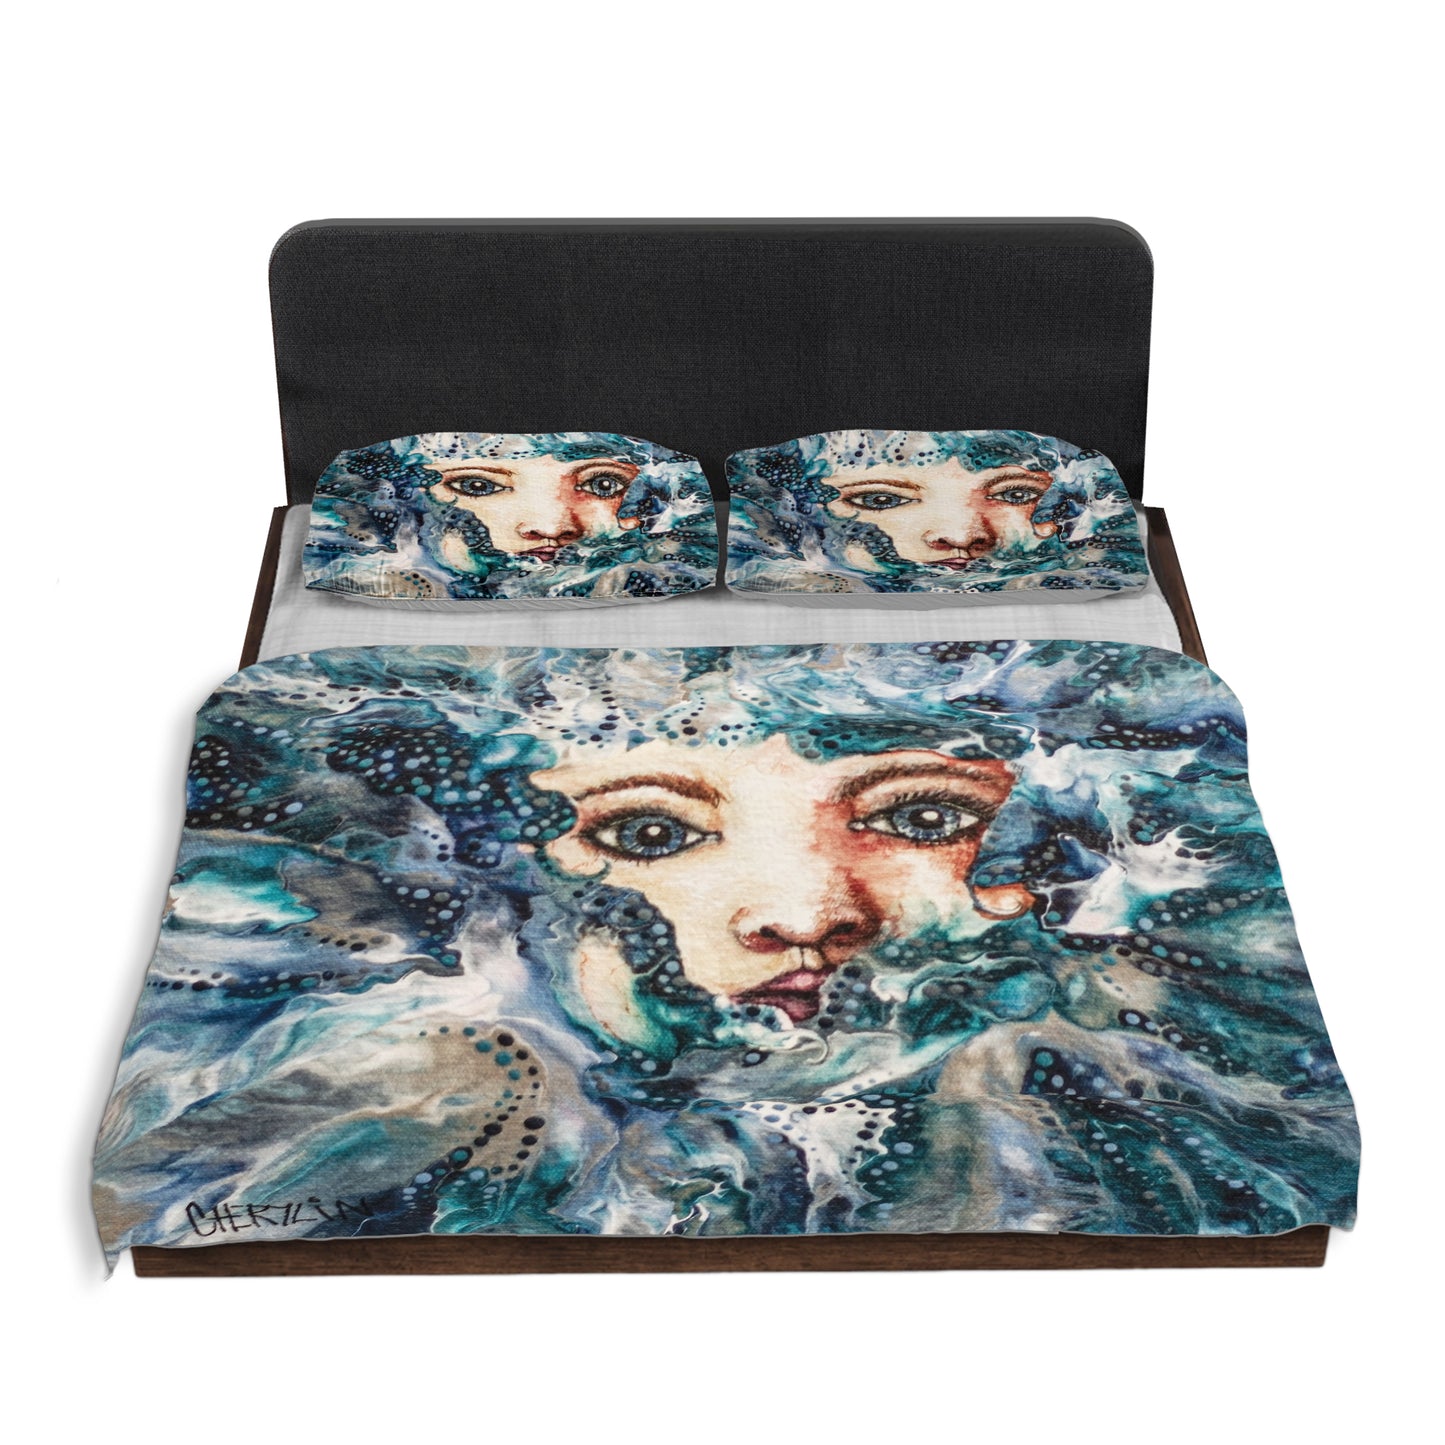 From Within By Cherylin Louw Duvet Cover Set